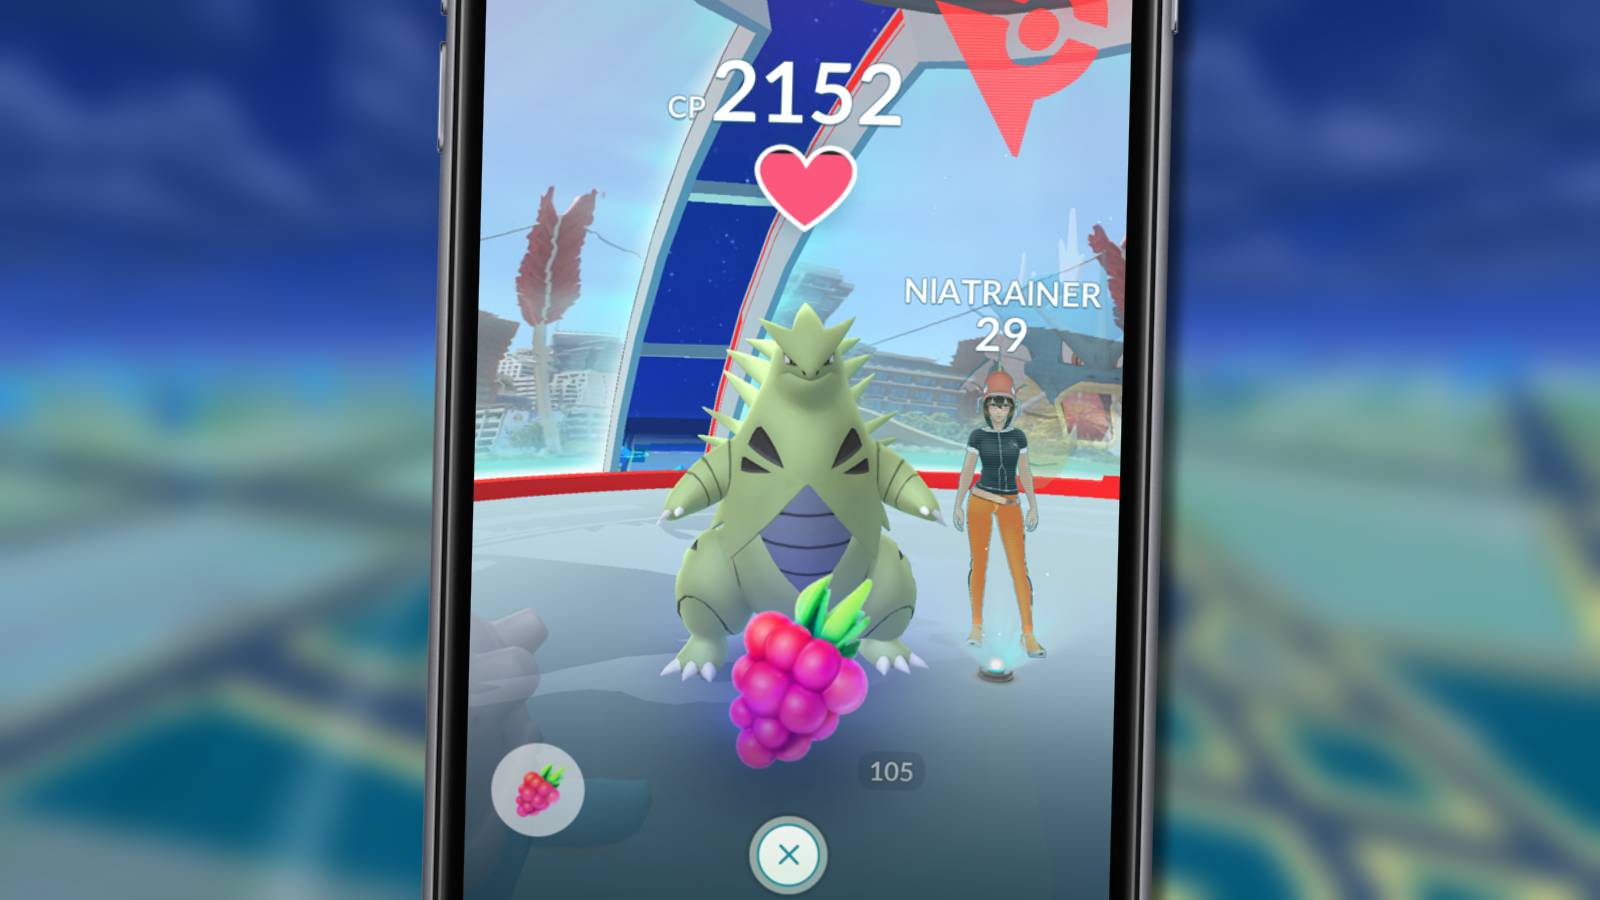 A mobile phone is visible with Pokemon Go on the screen